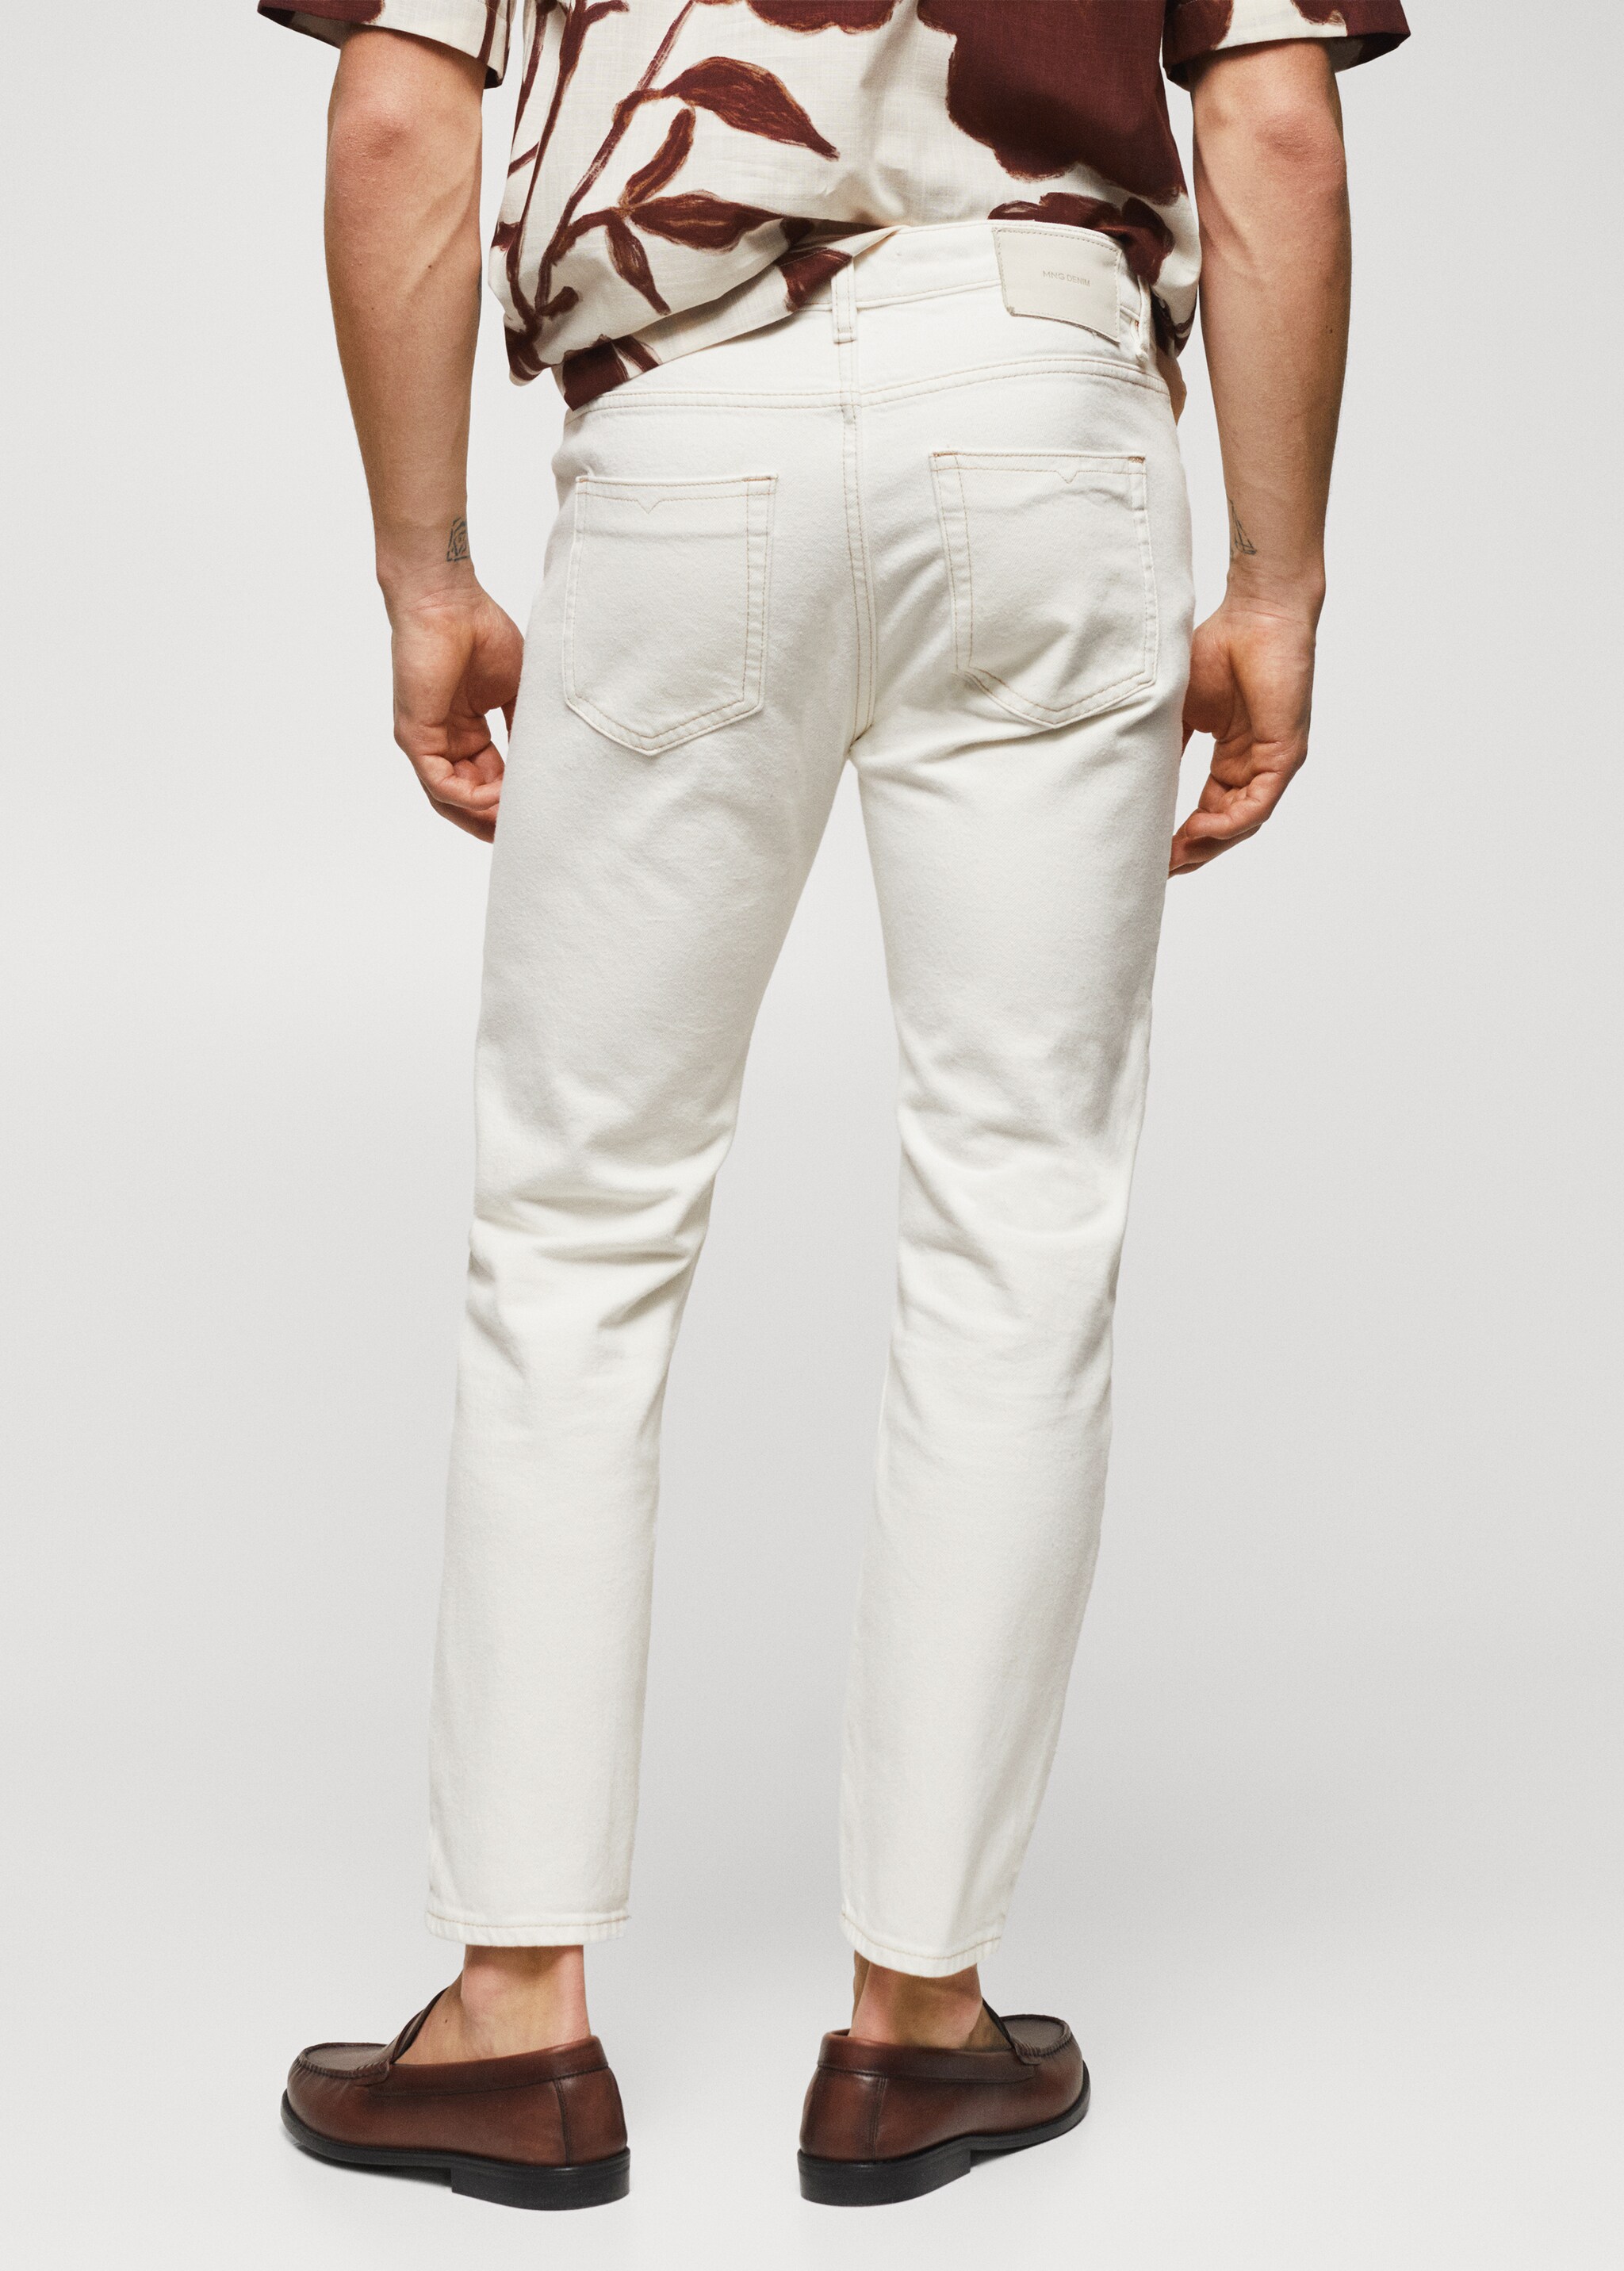 Jean Ben tapered cropped - Verso de l’article